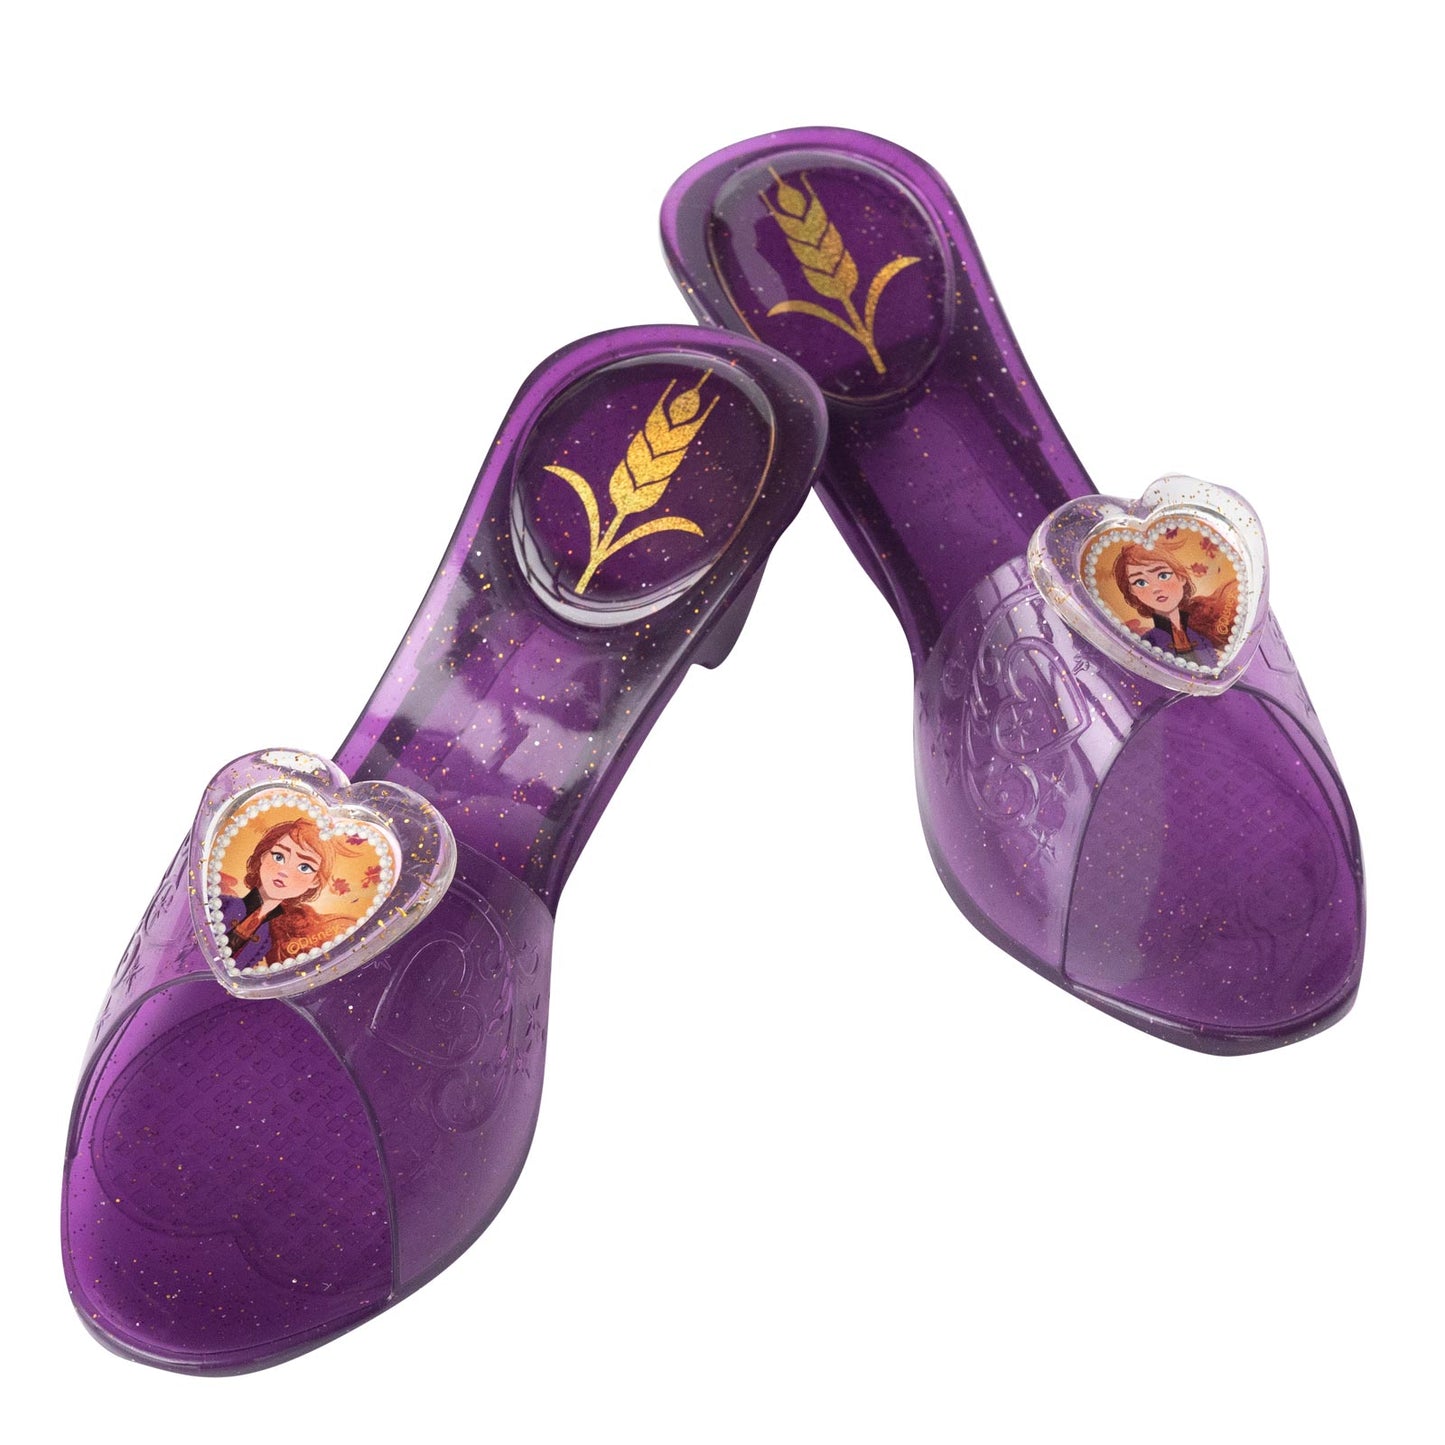 Frozen 2 Anna Kids Jelly Shoes